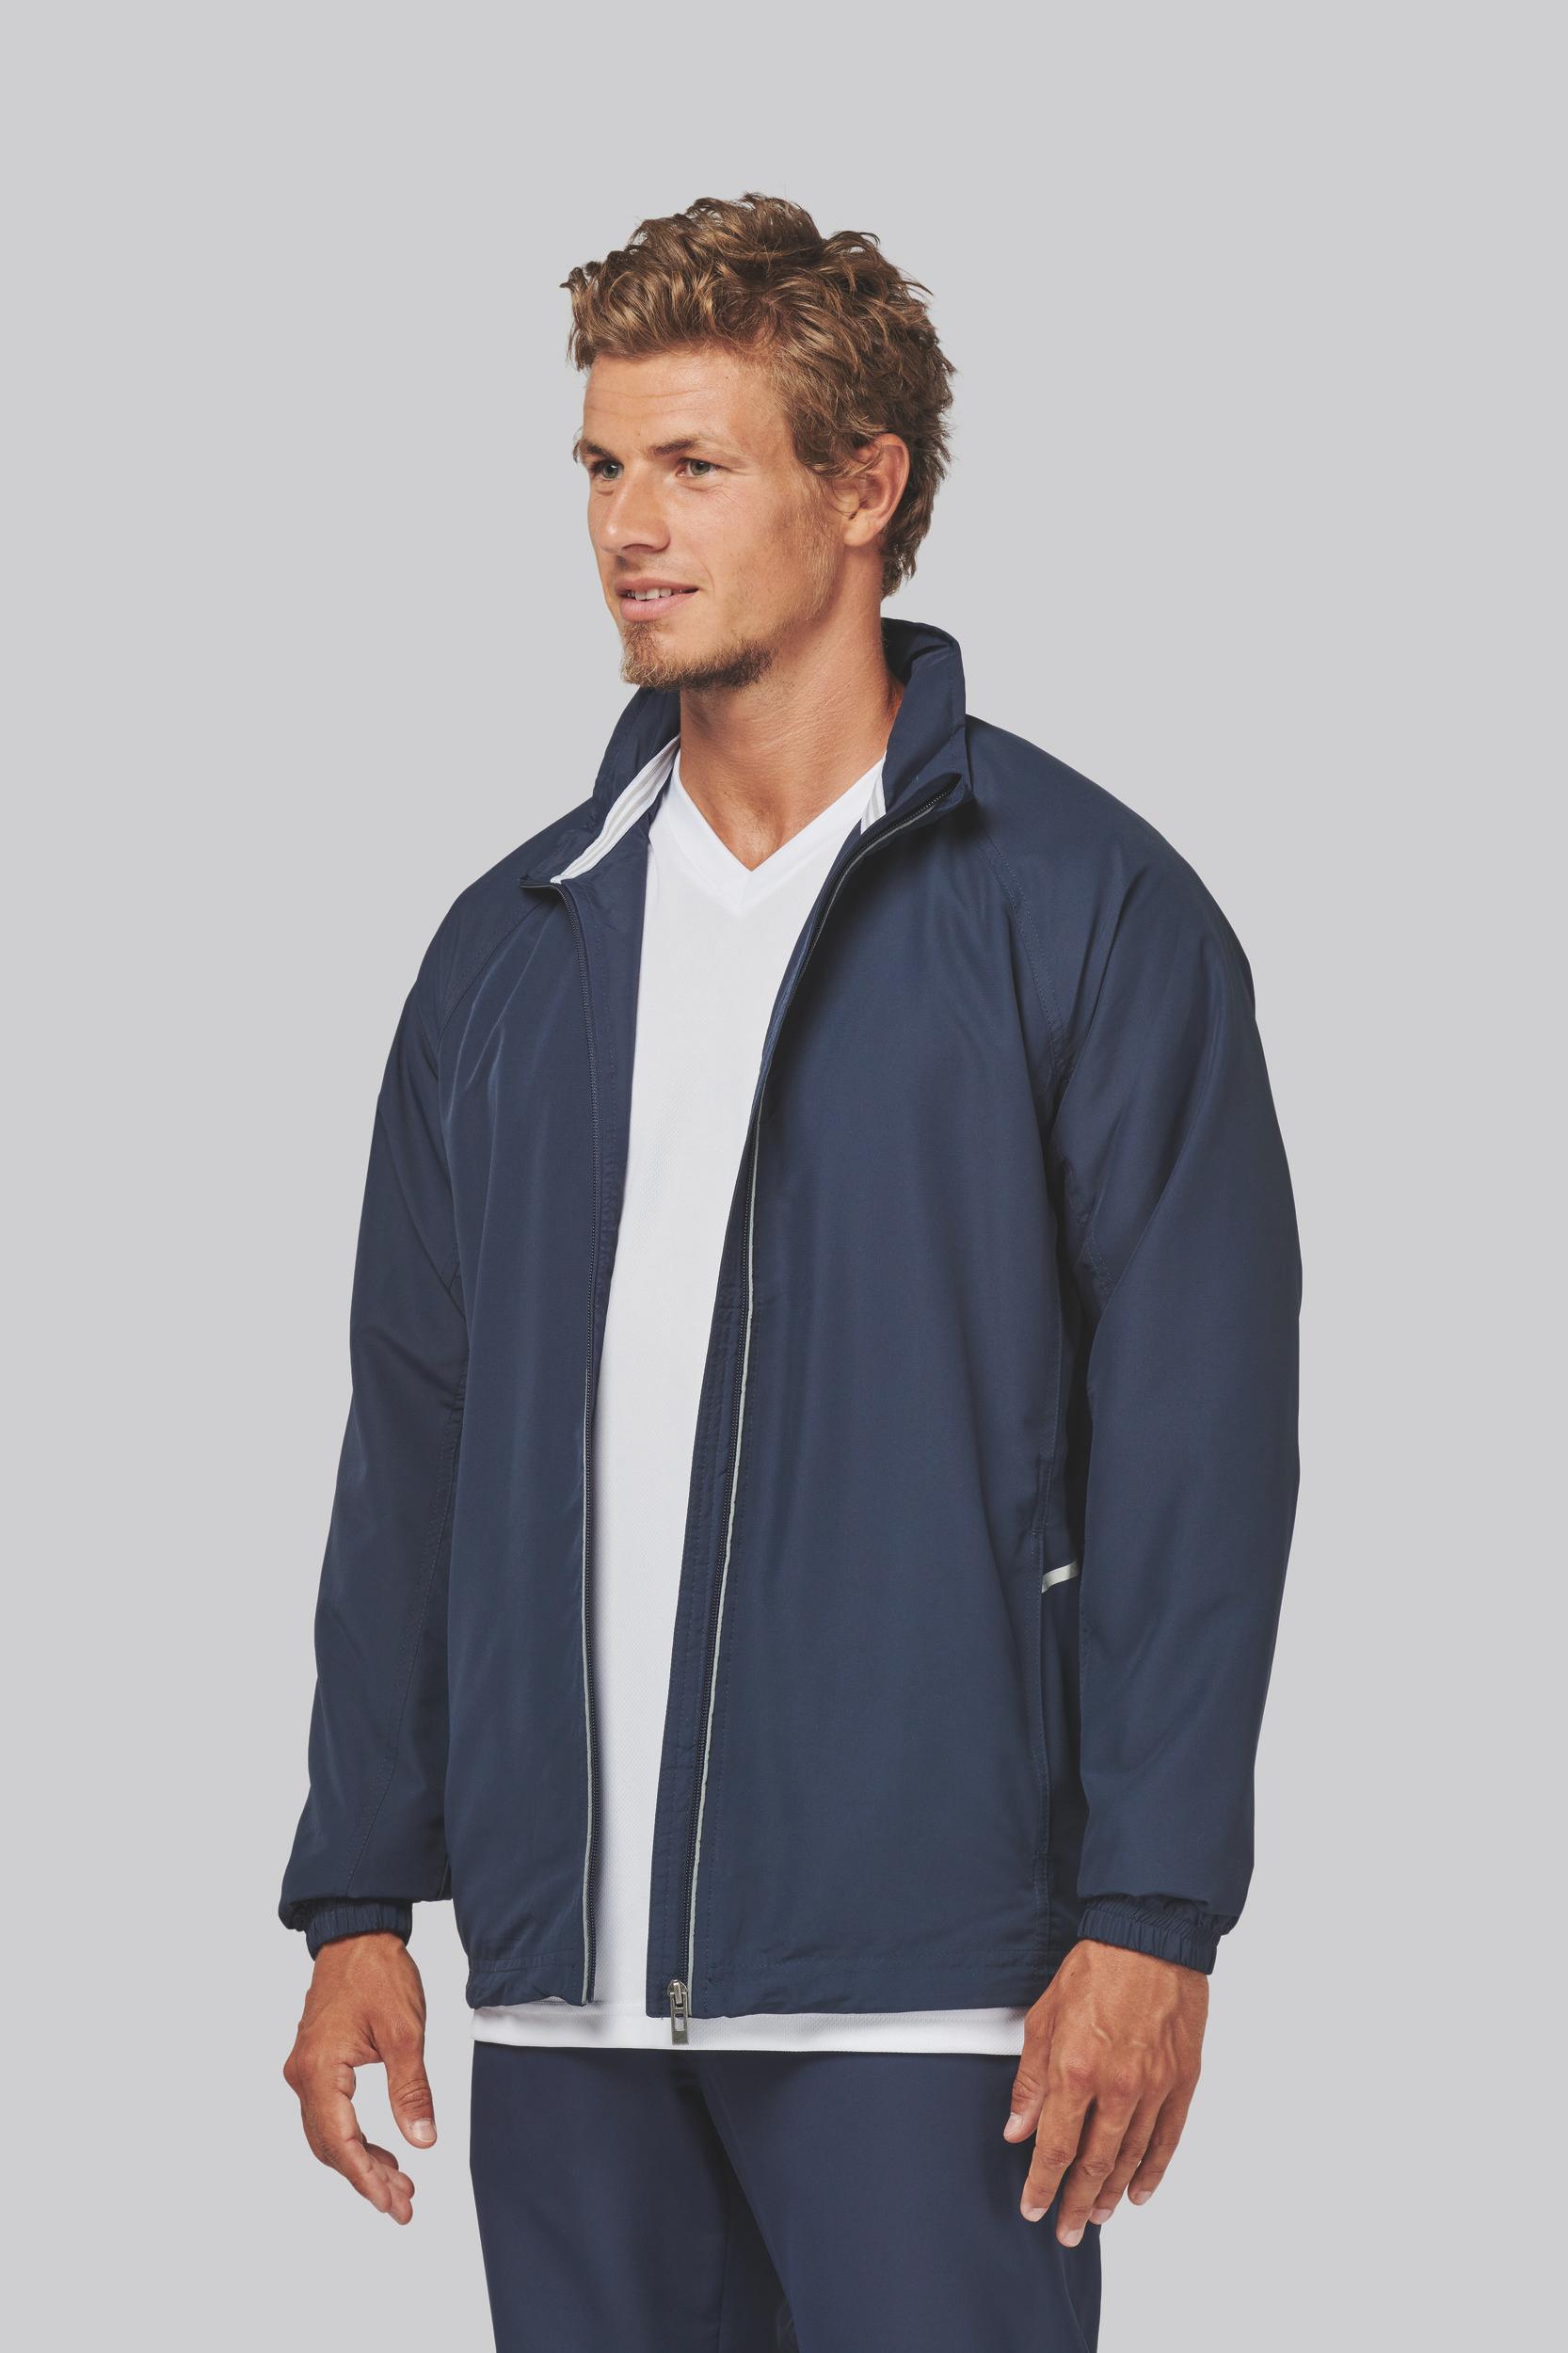 pictoVeste Softshell Homme Personnalisable Avec Tunetoo 